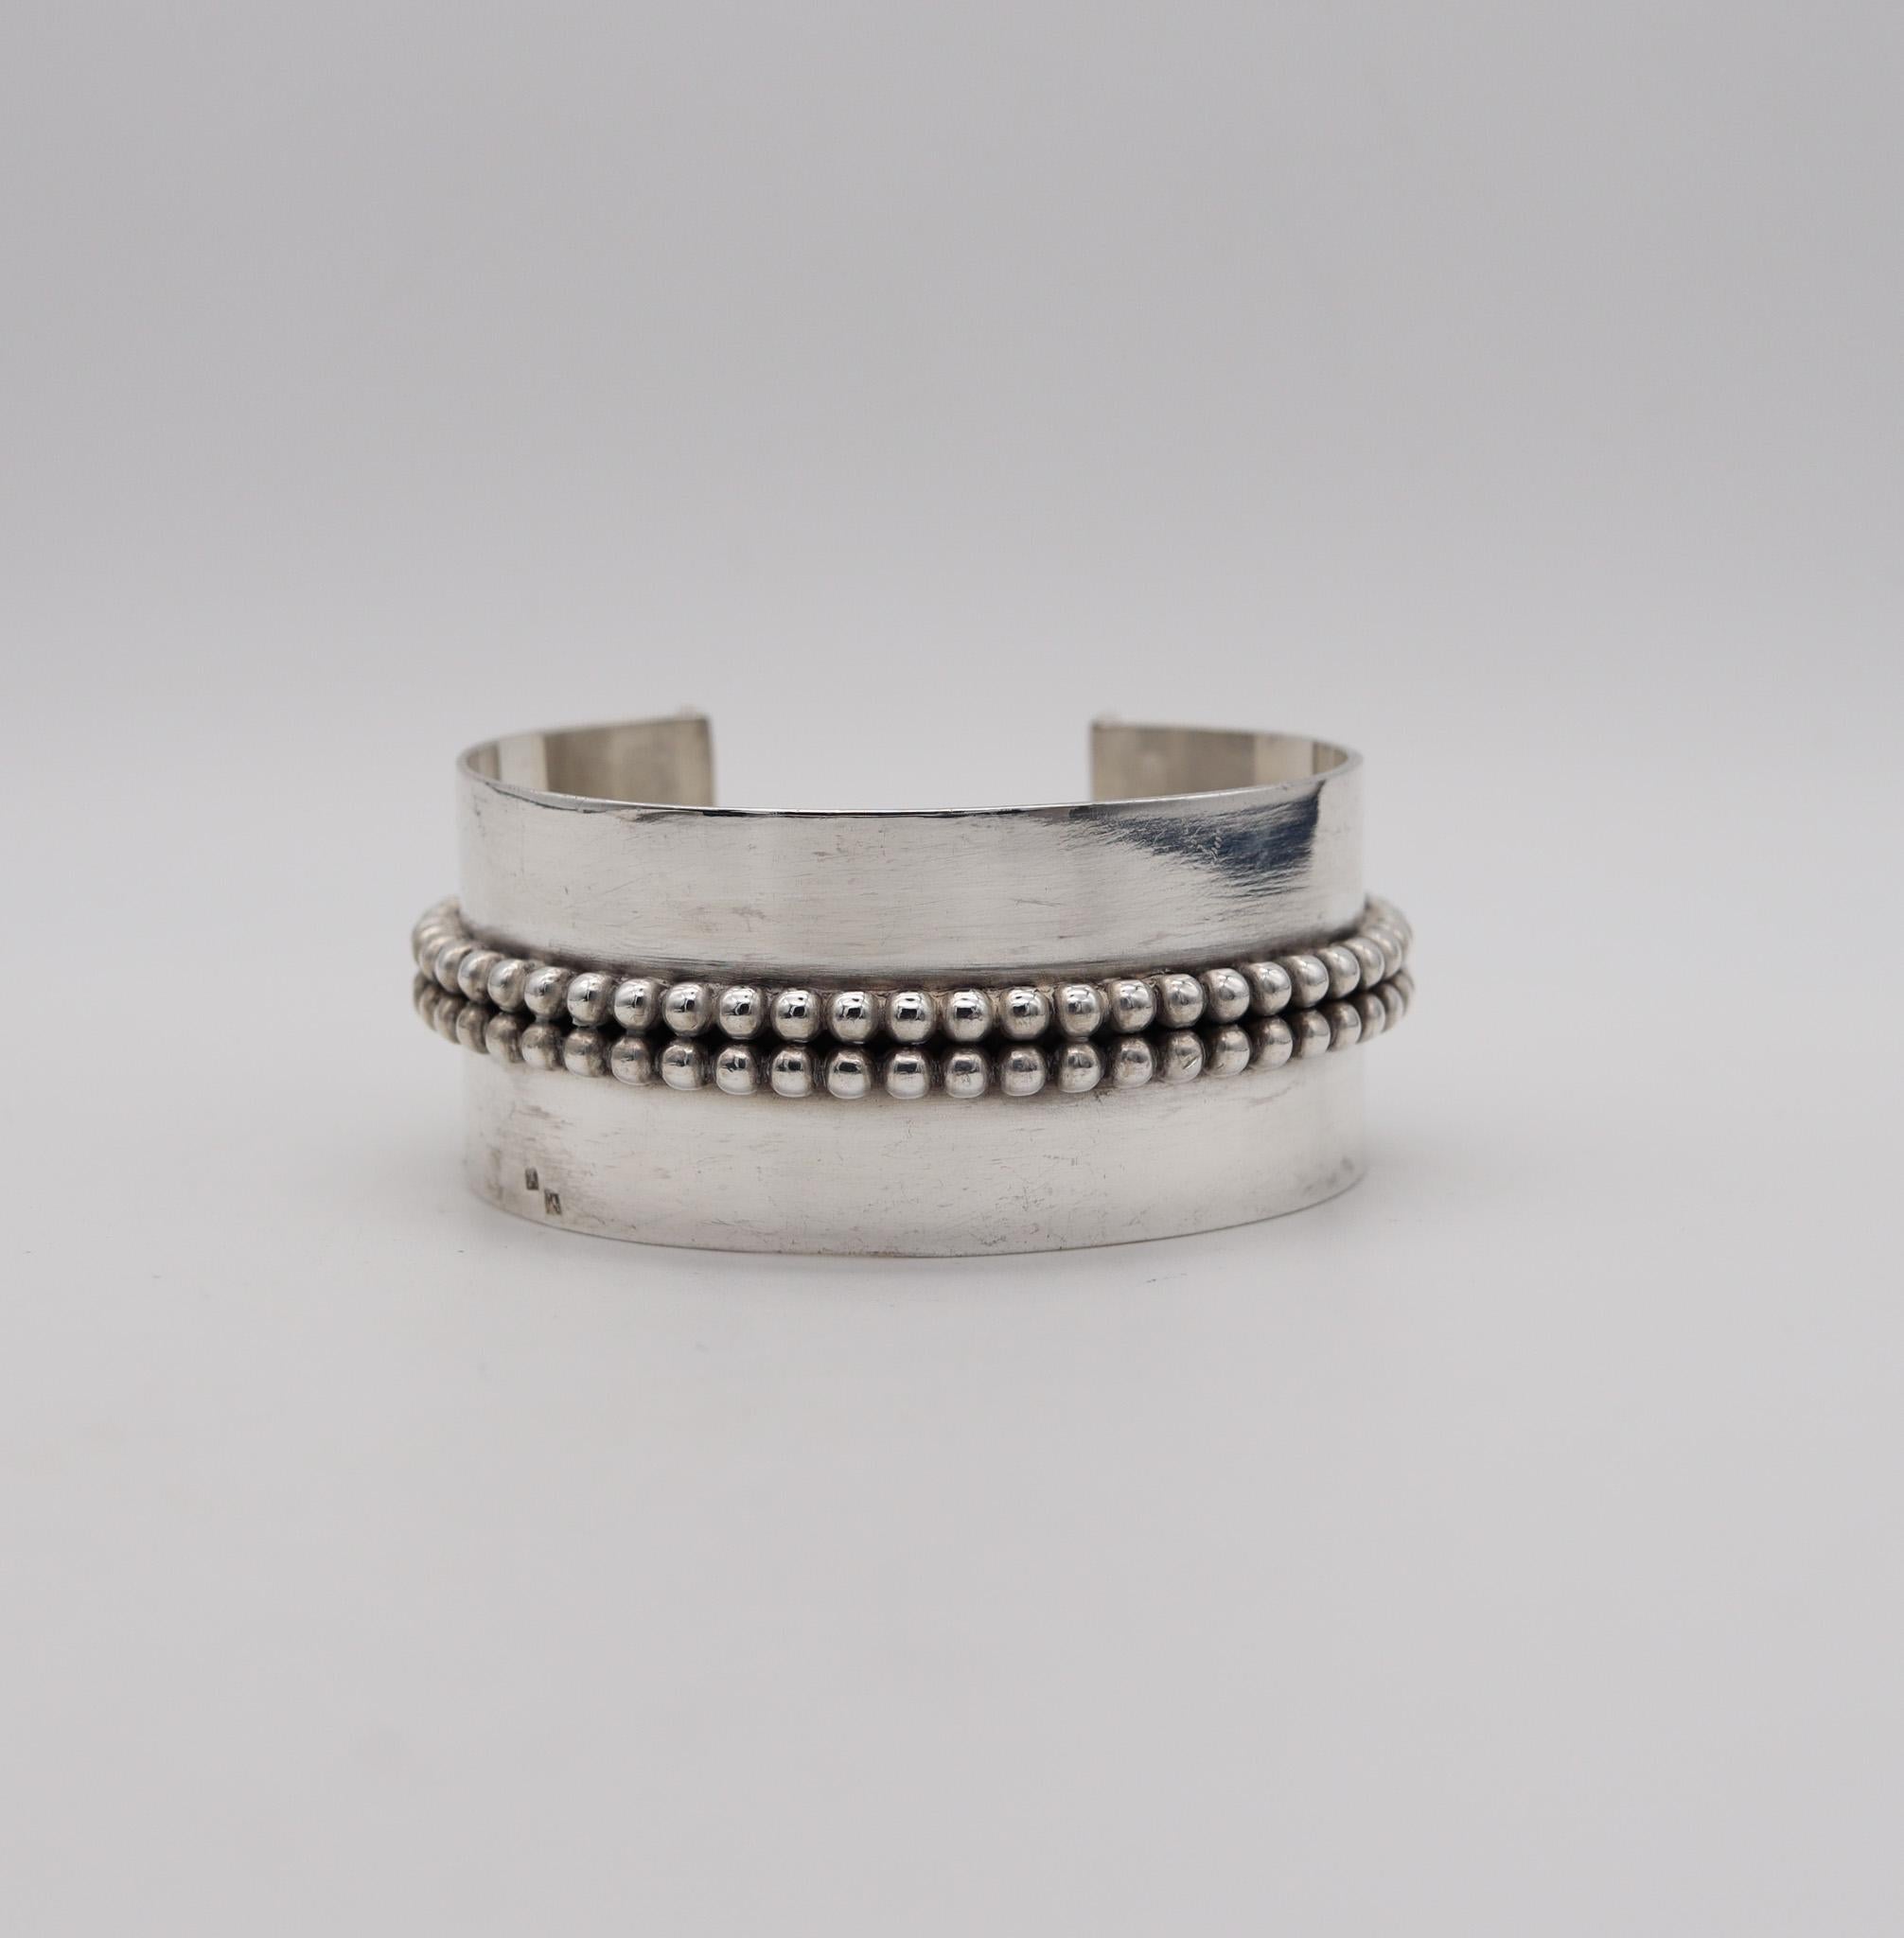 Sculptural cuff designed by Jean Després (1886-1980).

Exceptional collector's piece, created in Paris France by the artist goldsmith Jean Després, back in the 1960. This cuff bracelet has been crafted with retro modernist patterns in solid